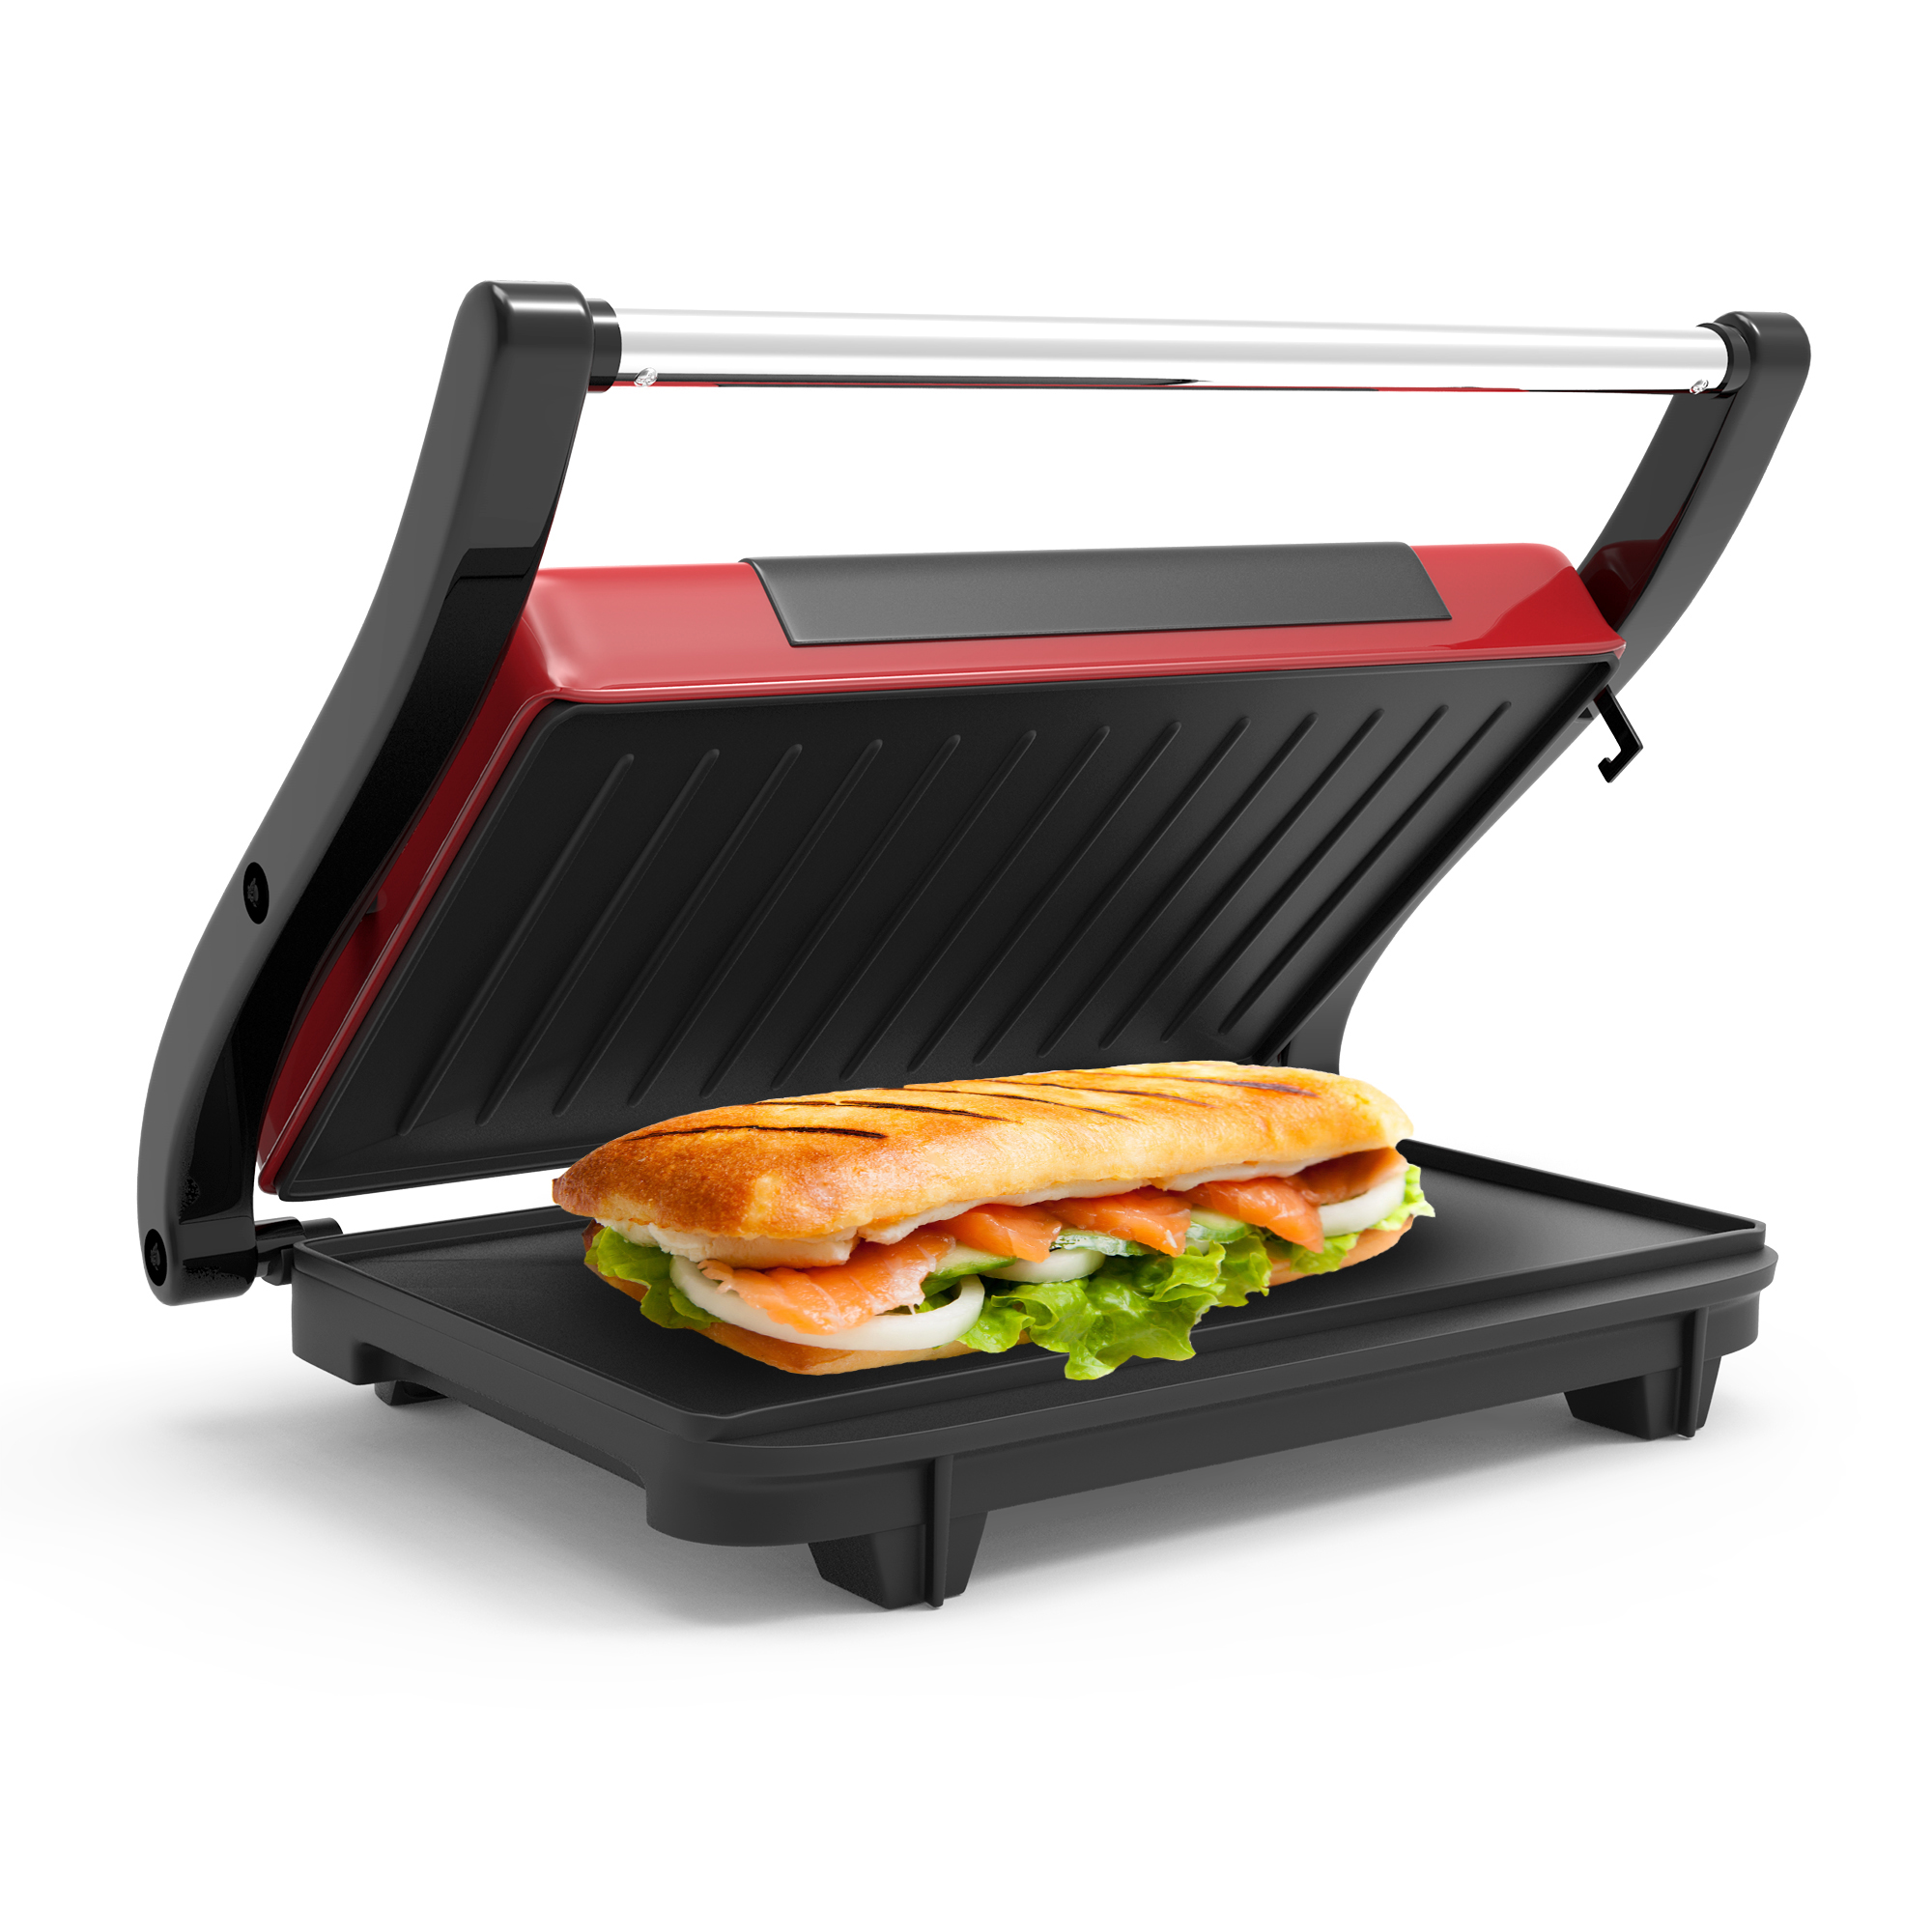 Chef Buddy Non-Stick Grill and Panini Press, Red - image 1 of 8